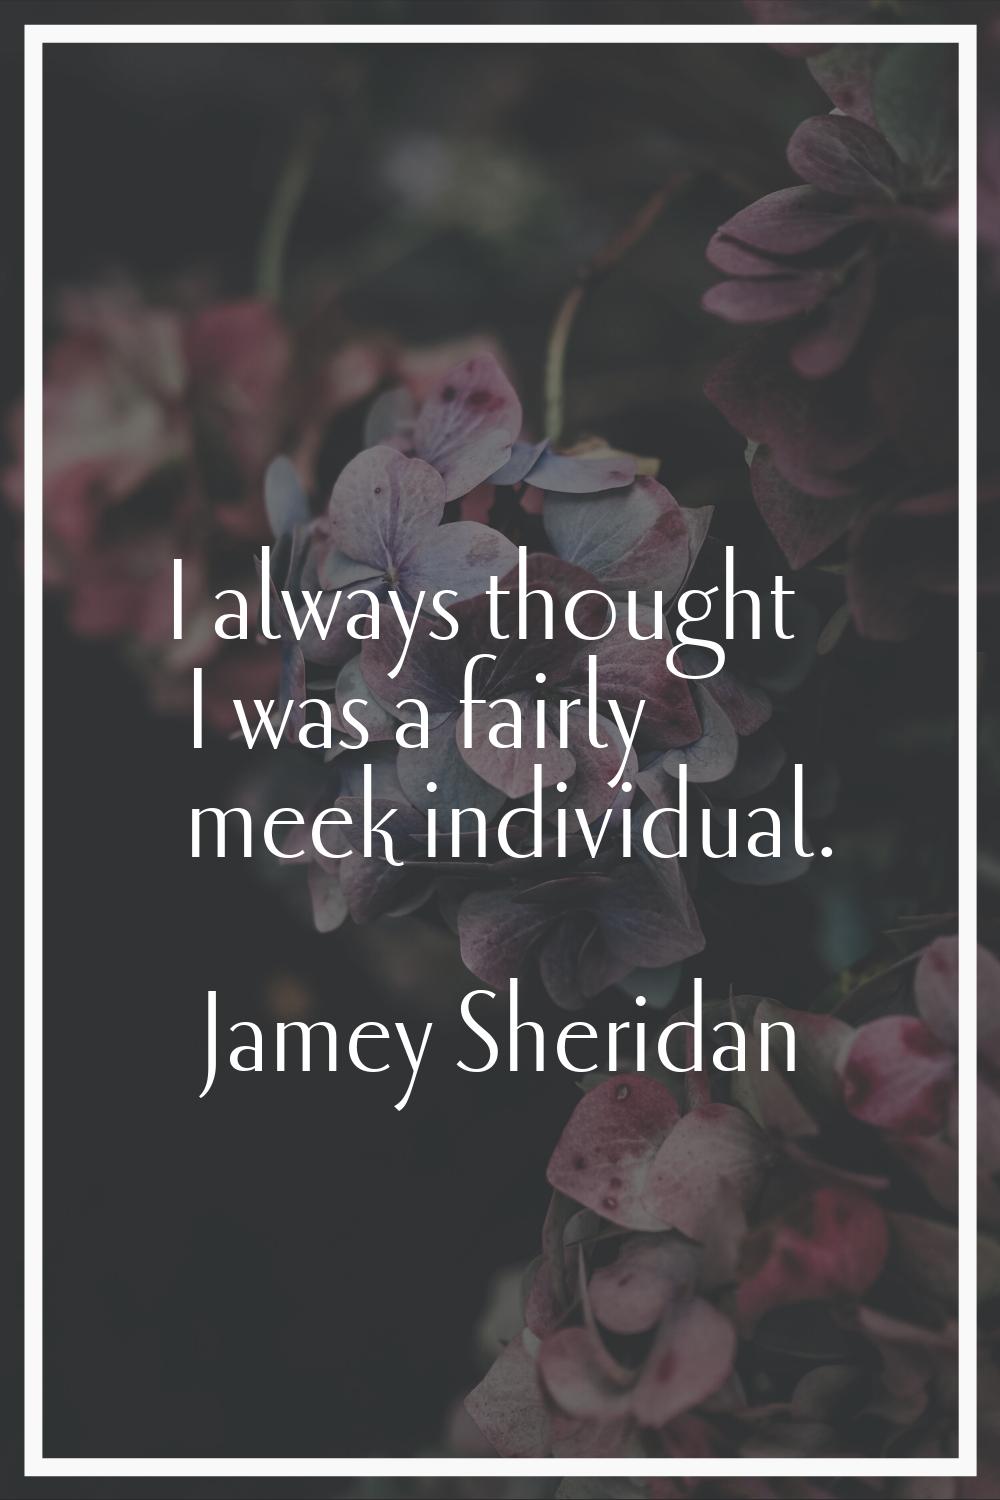 I always thought I was a fairly meek individual.